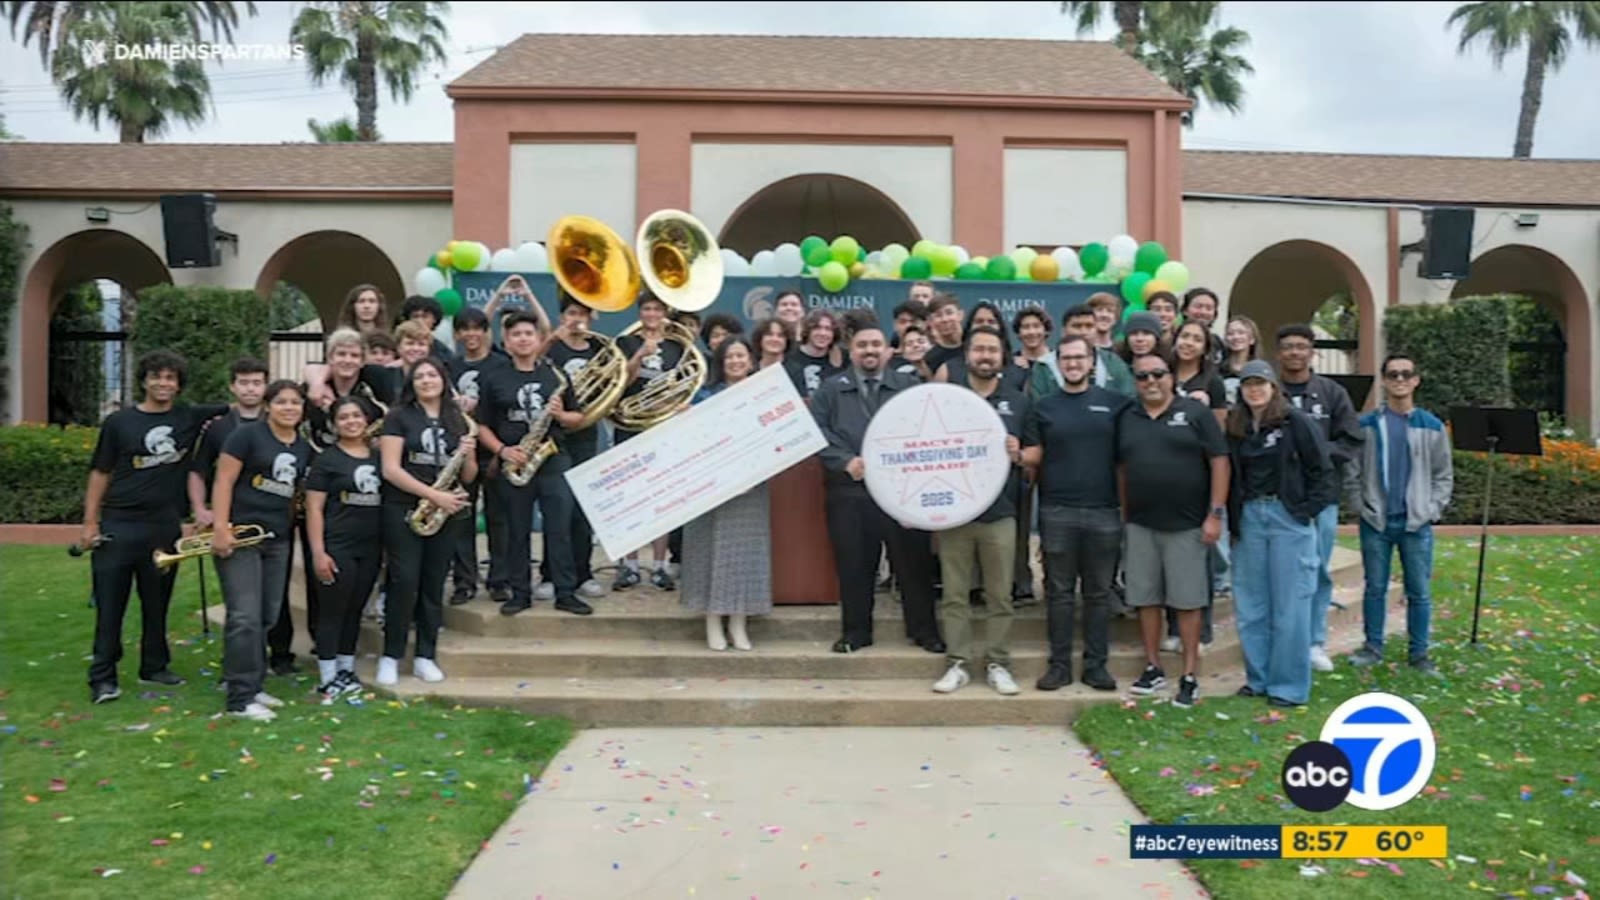 For the first time, Damien HS marching band will perform at the Macy's Thanksgiving Day Parade